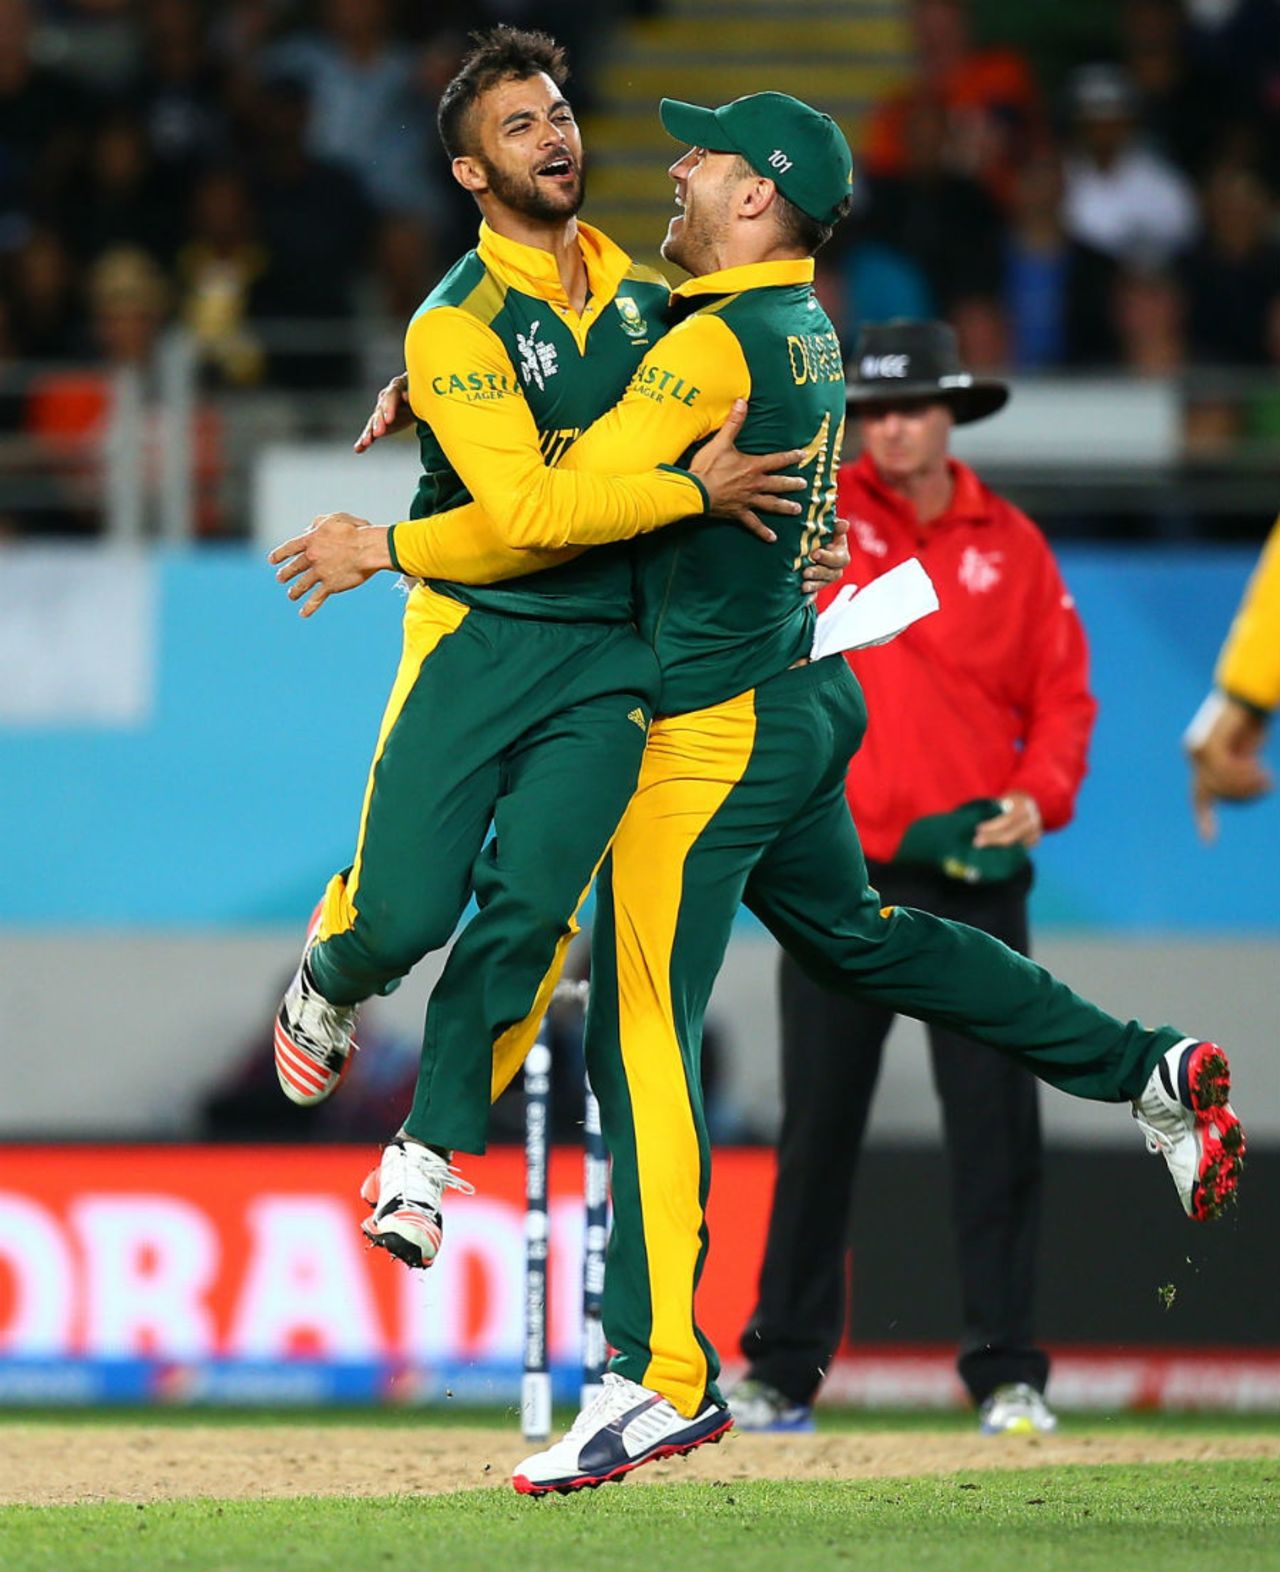 JP Duminy and Faf du Plessis celebrate a wicket , New Zealand v South Africa, World Cup 2015, 1st Semi-Final, Auckland, March 24, 2015